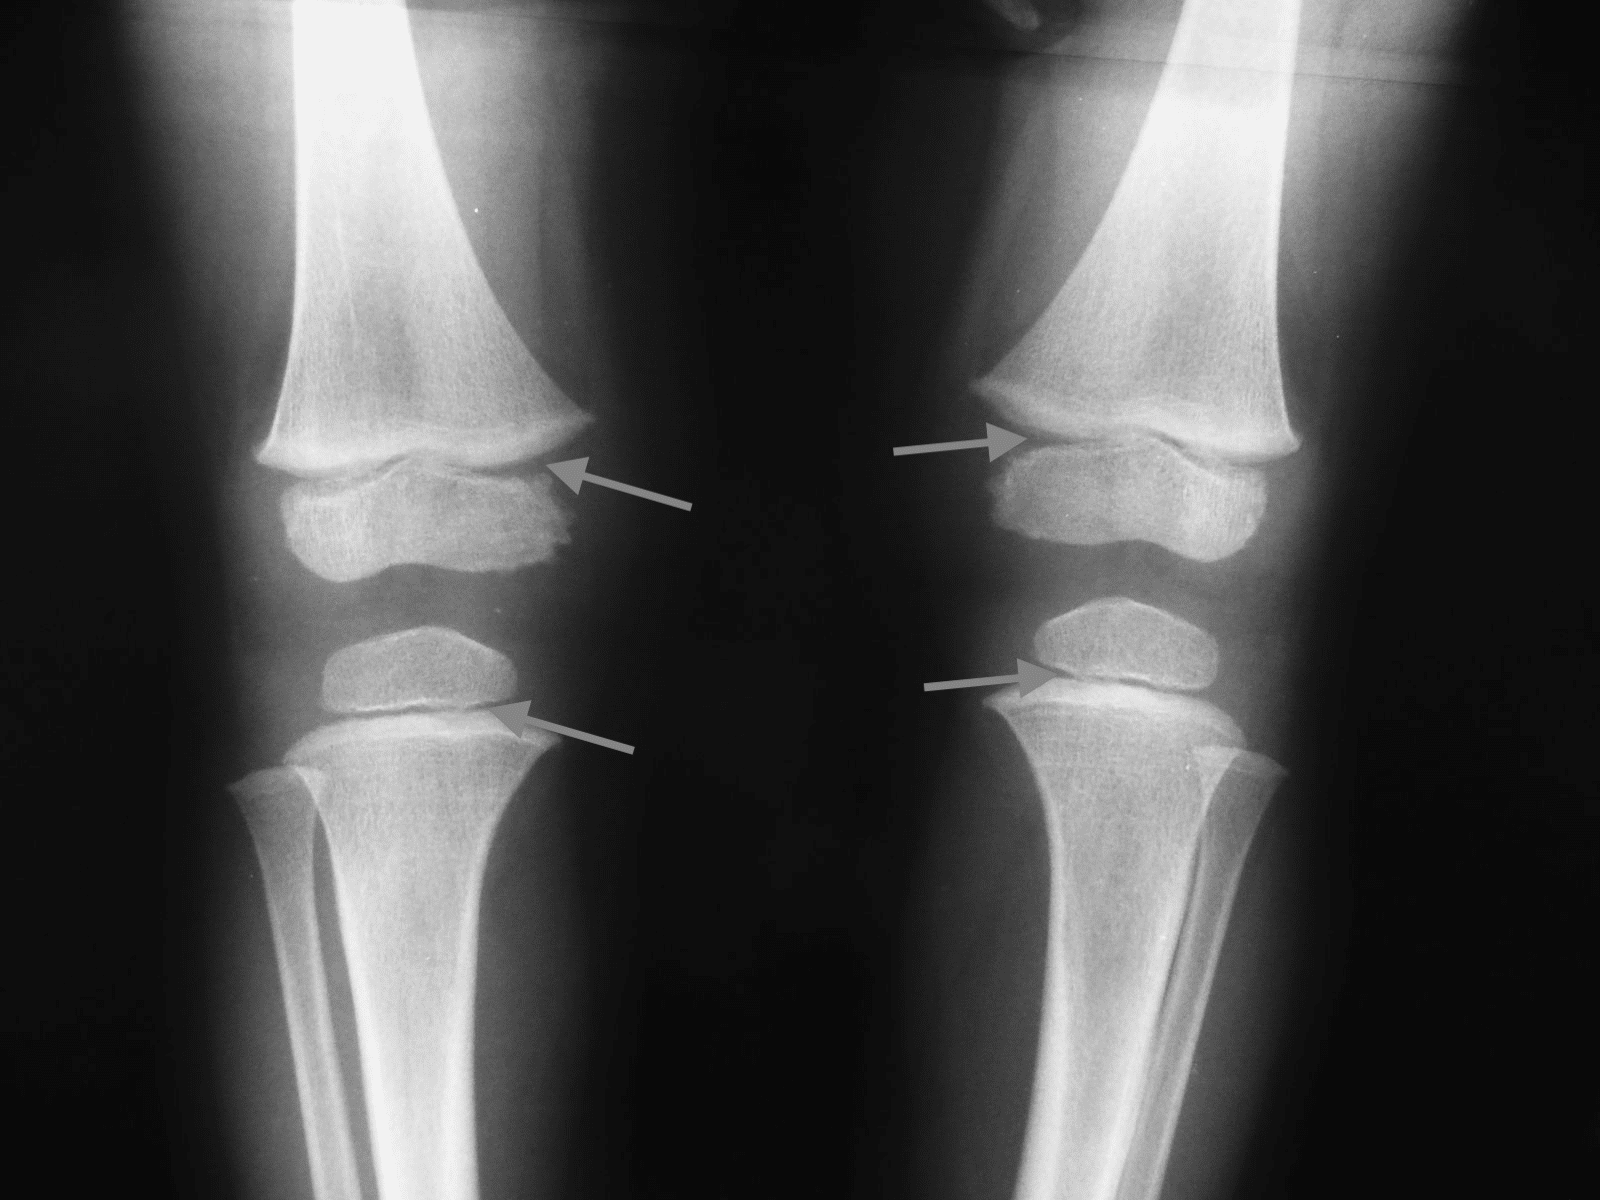 X-ray showing growth plates